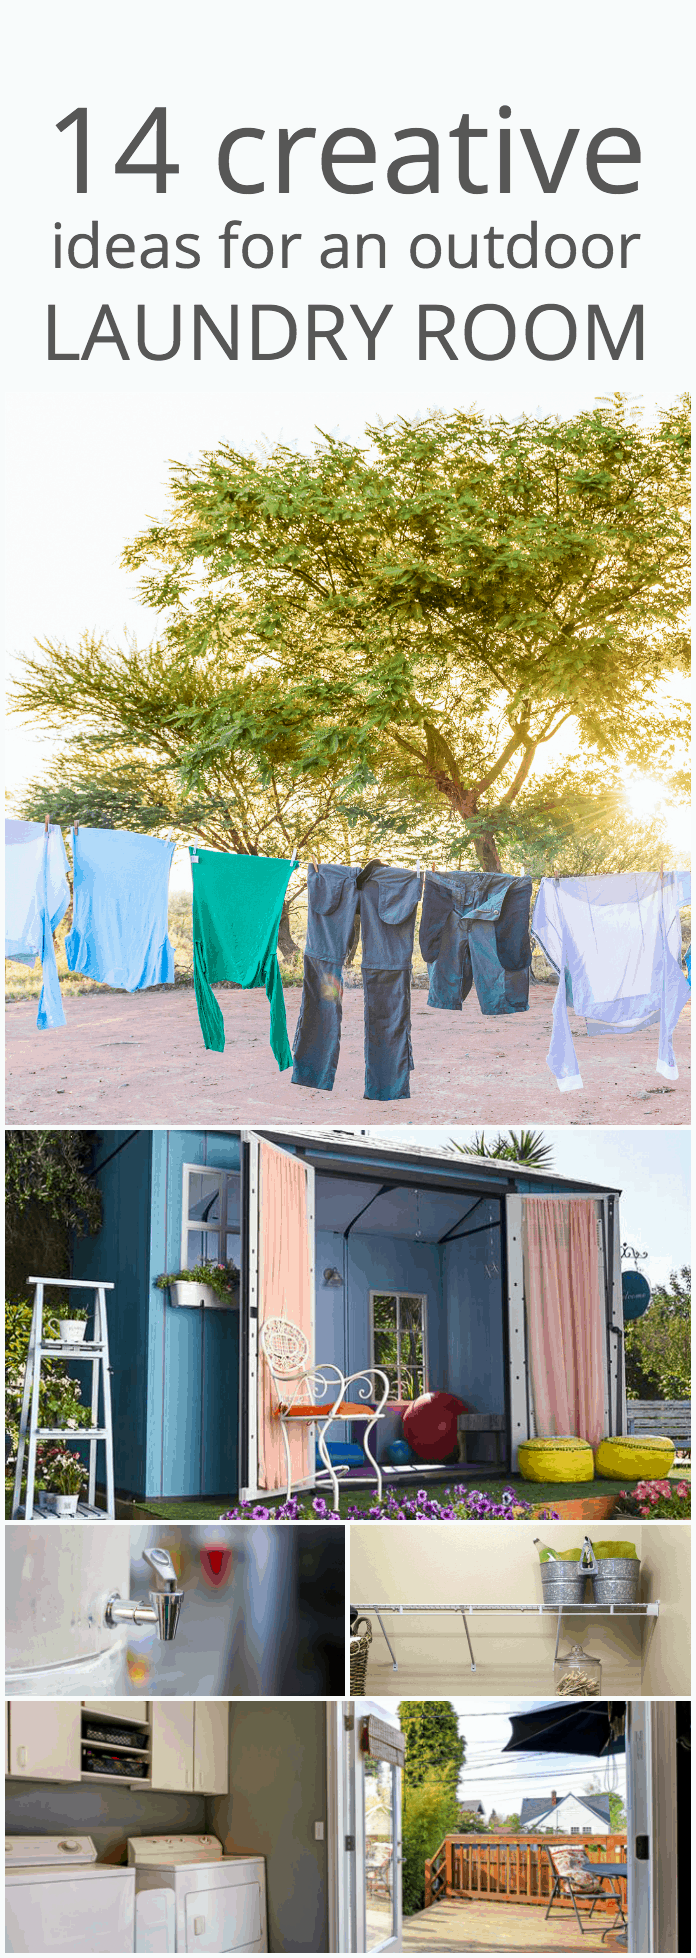 14 creative ideas for an outdoor #laundry room #renovation #diy